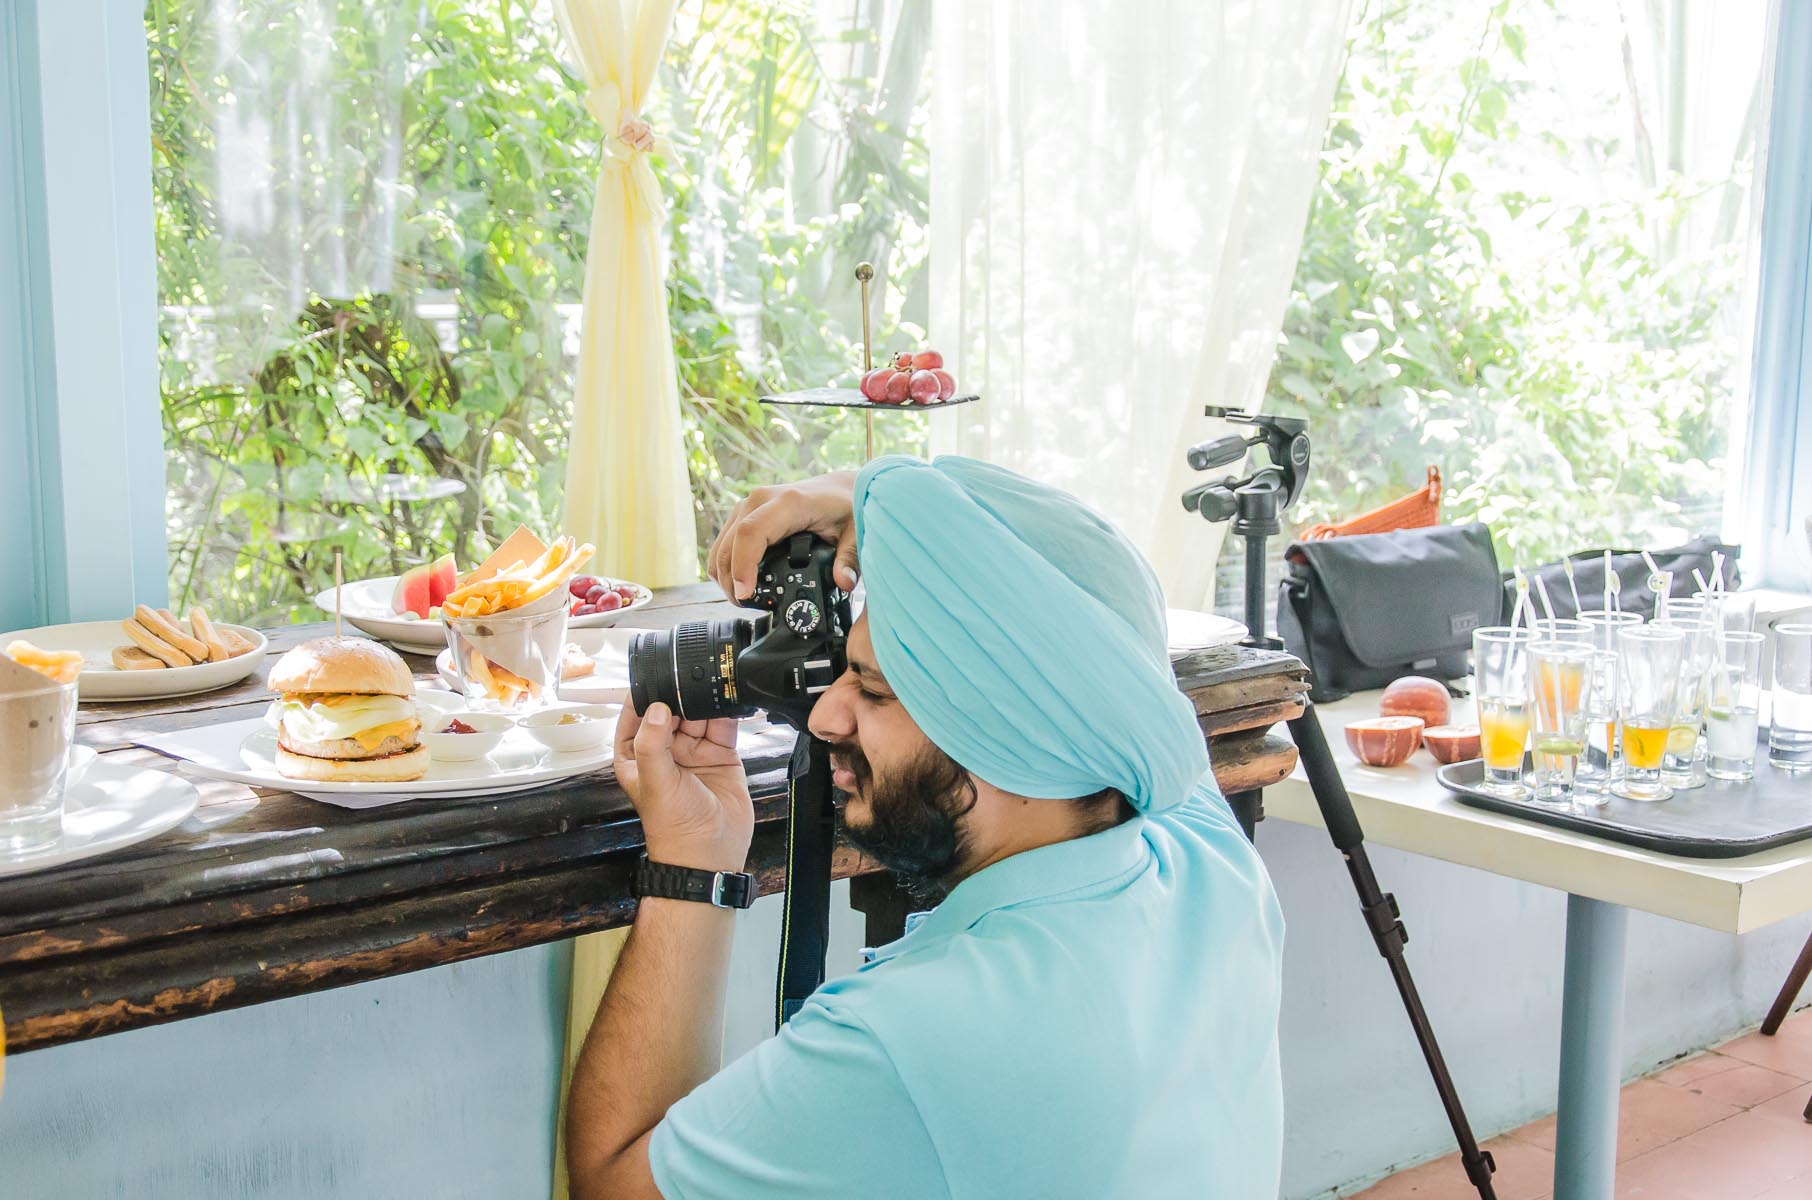 Food photography and styling workshop  Hardit Singh Bedi